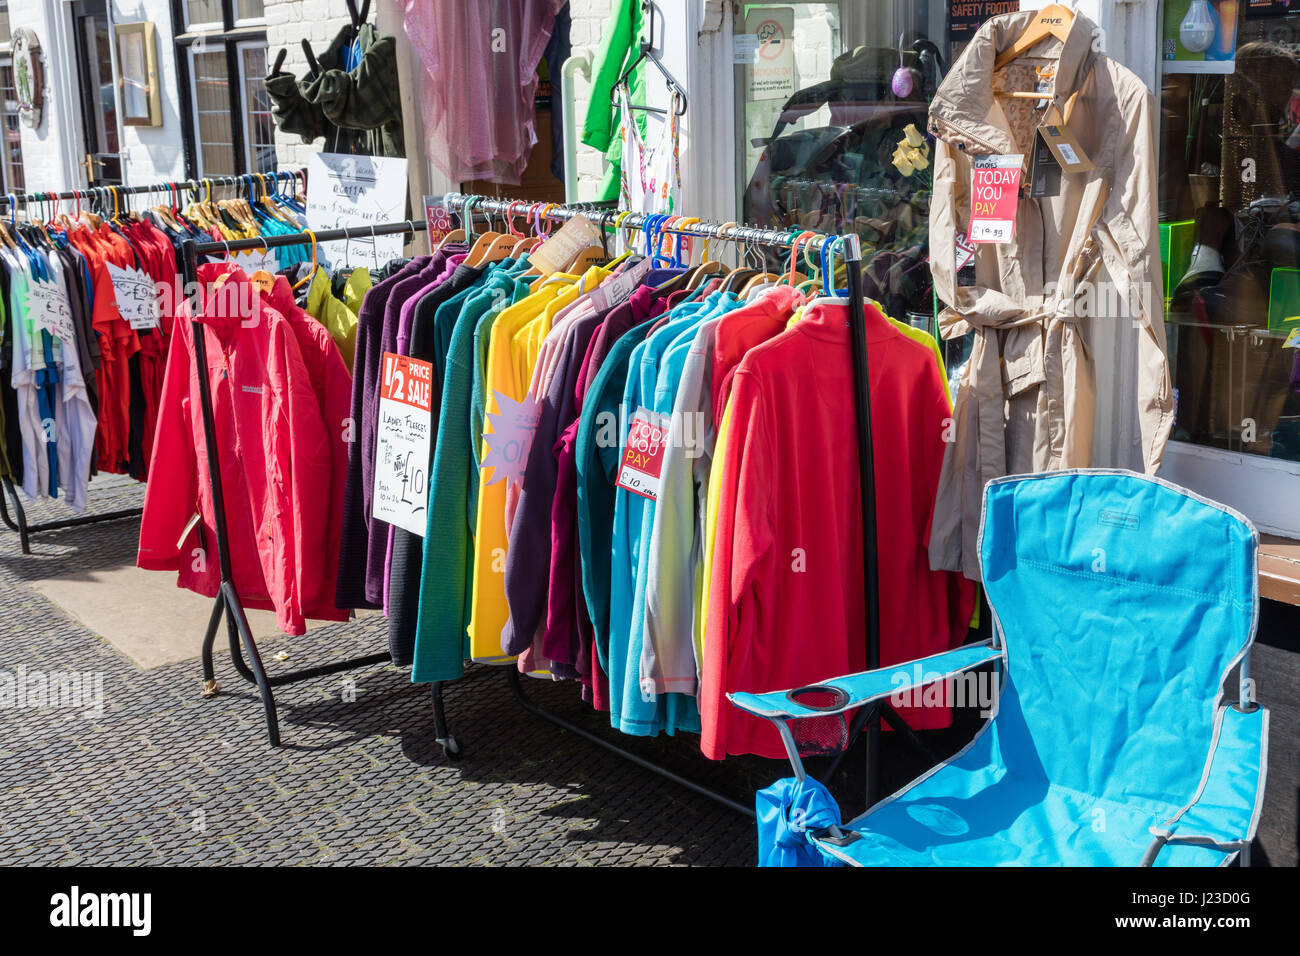 Clothing for sale on rails outside shop in West Malling, Kent, UK Stock Photo